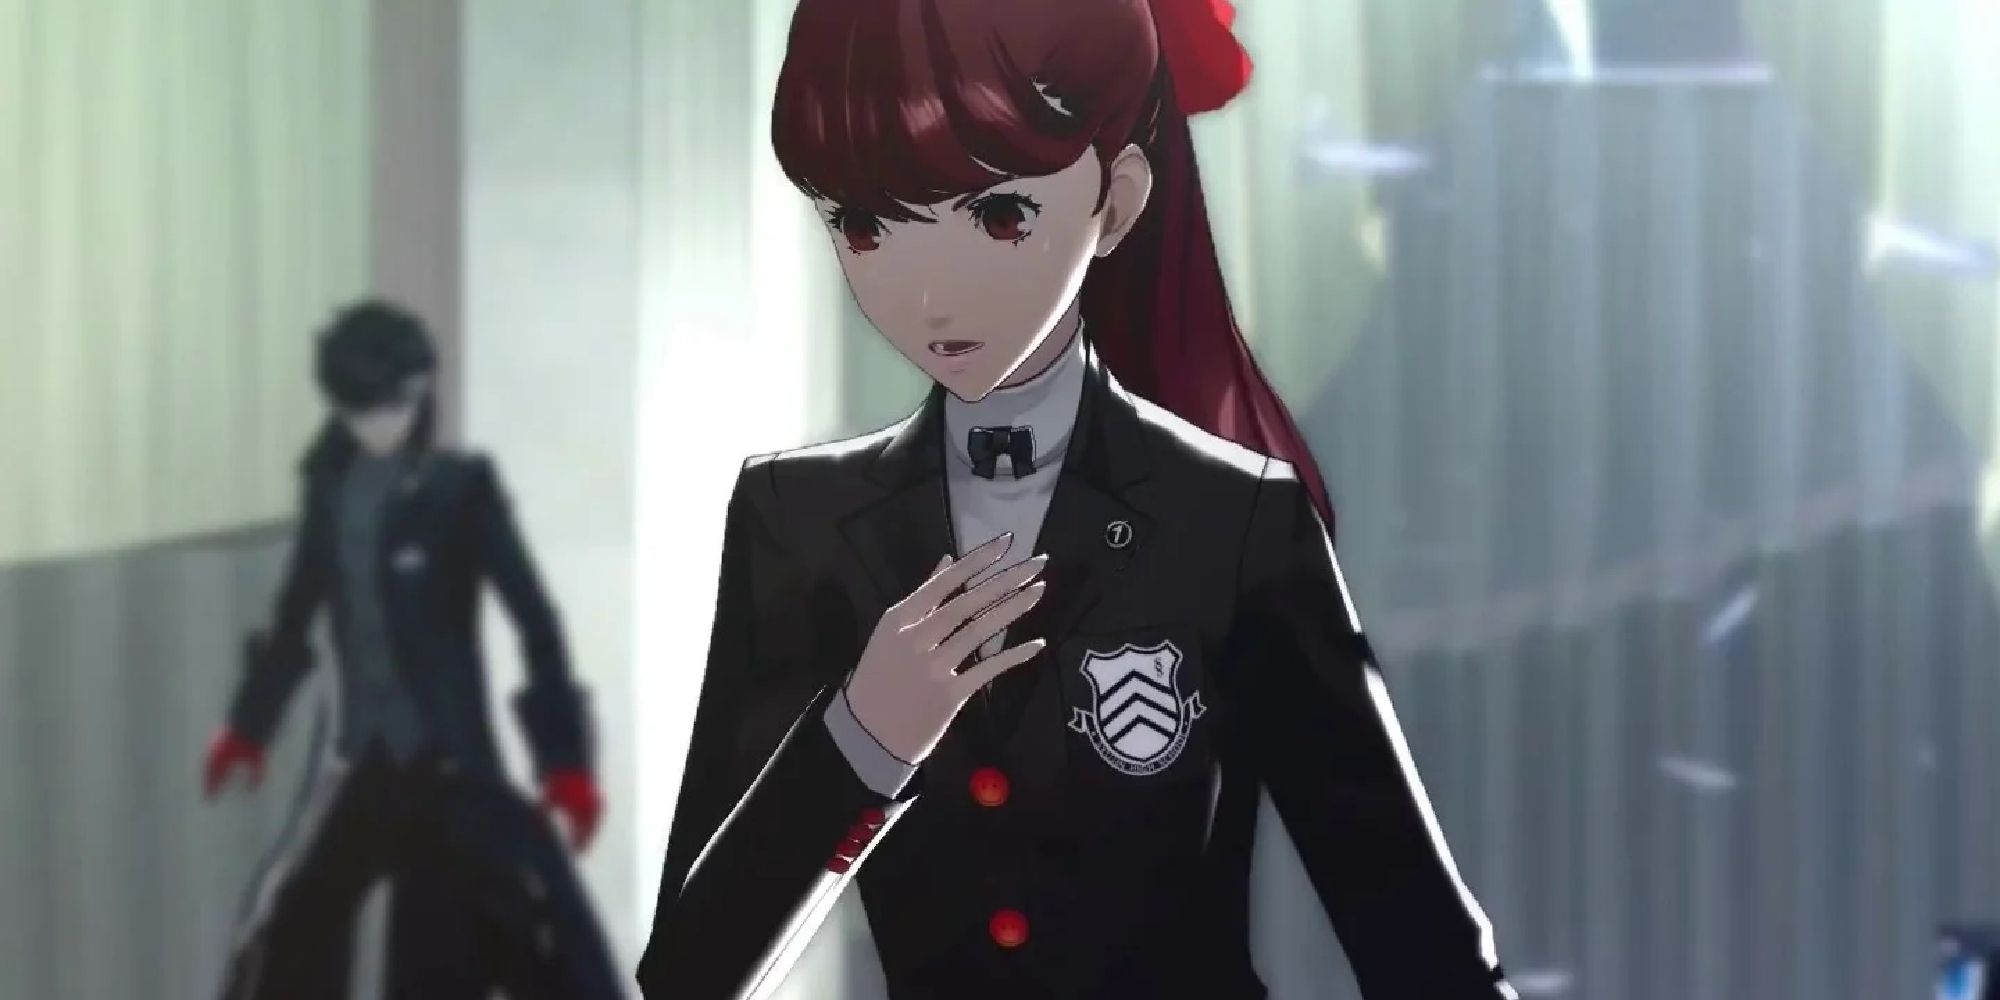 Kasumi, the phantom thief introduced in the Royal version of Persona 5